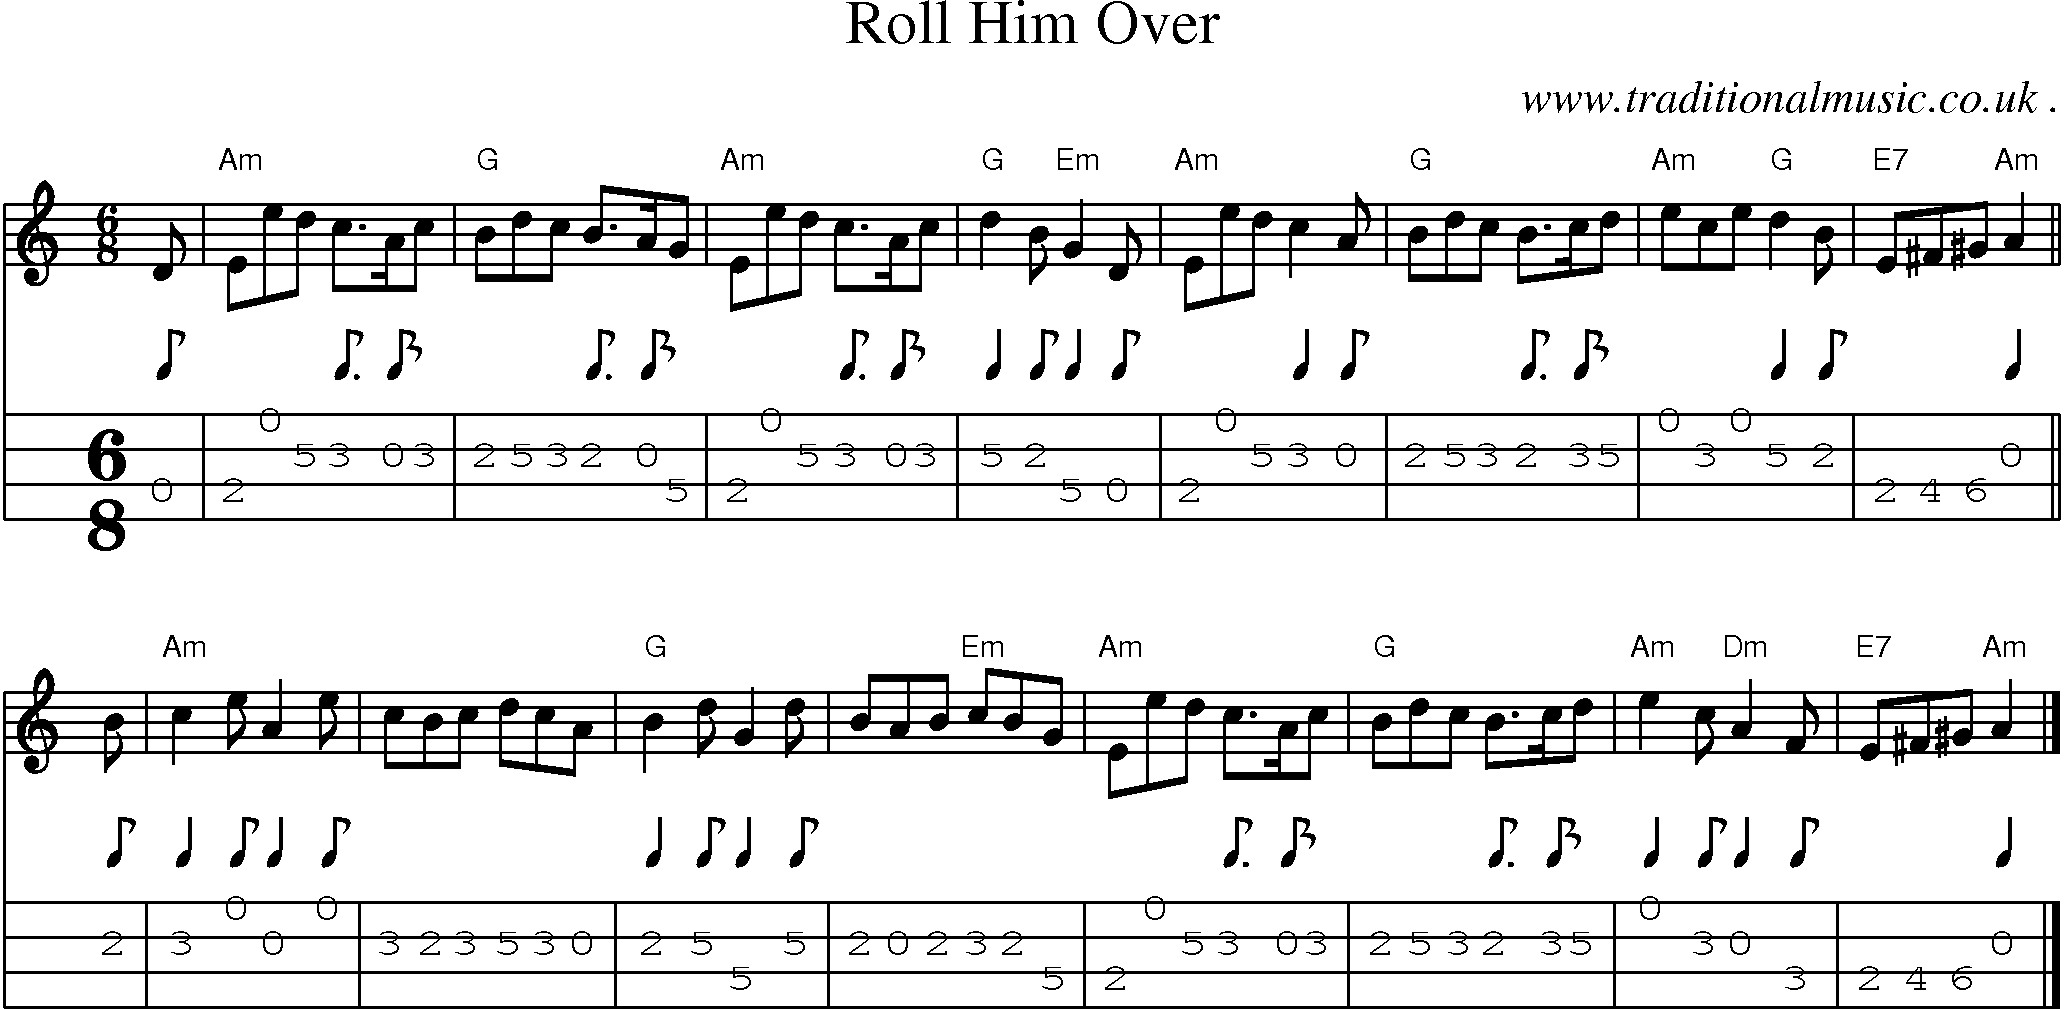 Sheet-music  score, Chords and Mandolin Tabs for Roll Him Over